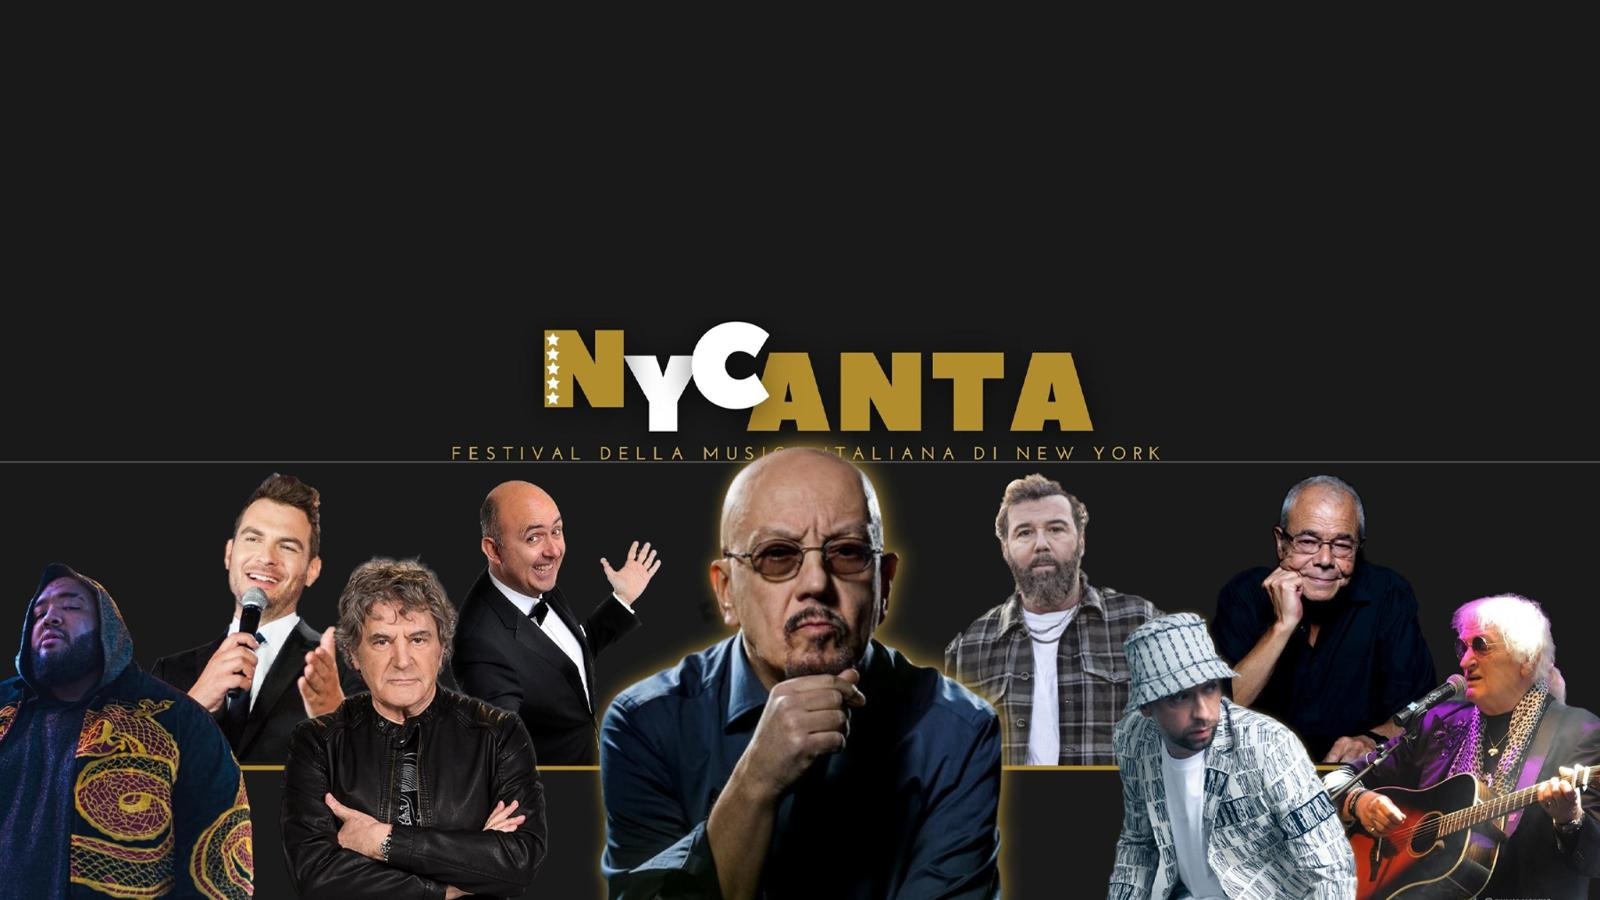 NYCANTA: registrations are open for the 14th edition